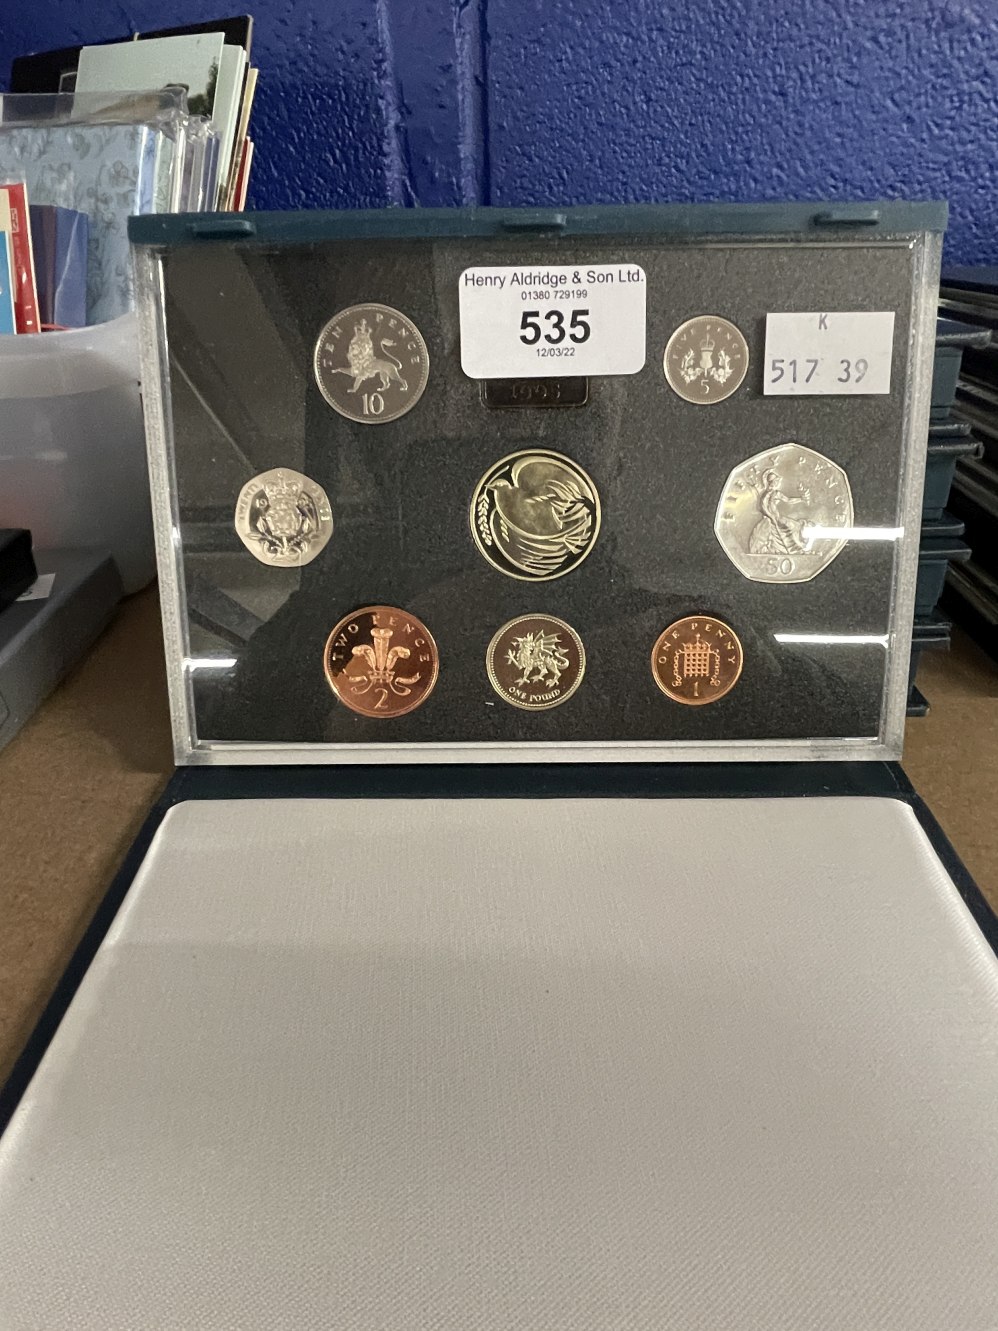 Numismatics: Coins, proof sets Royal Mint coins of the United Kingdom Year sets 1995 - 1999, all